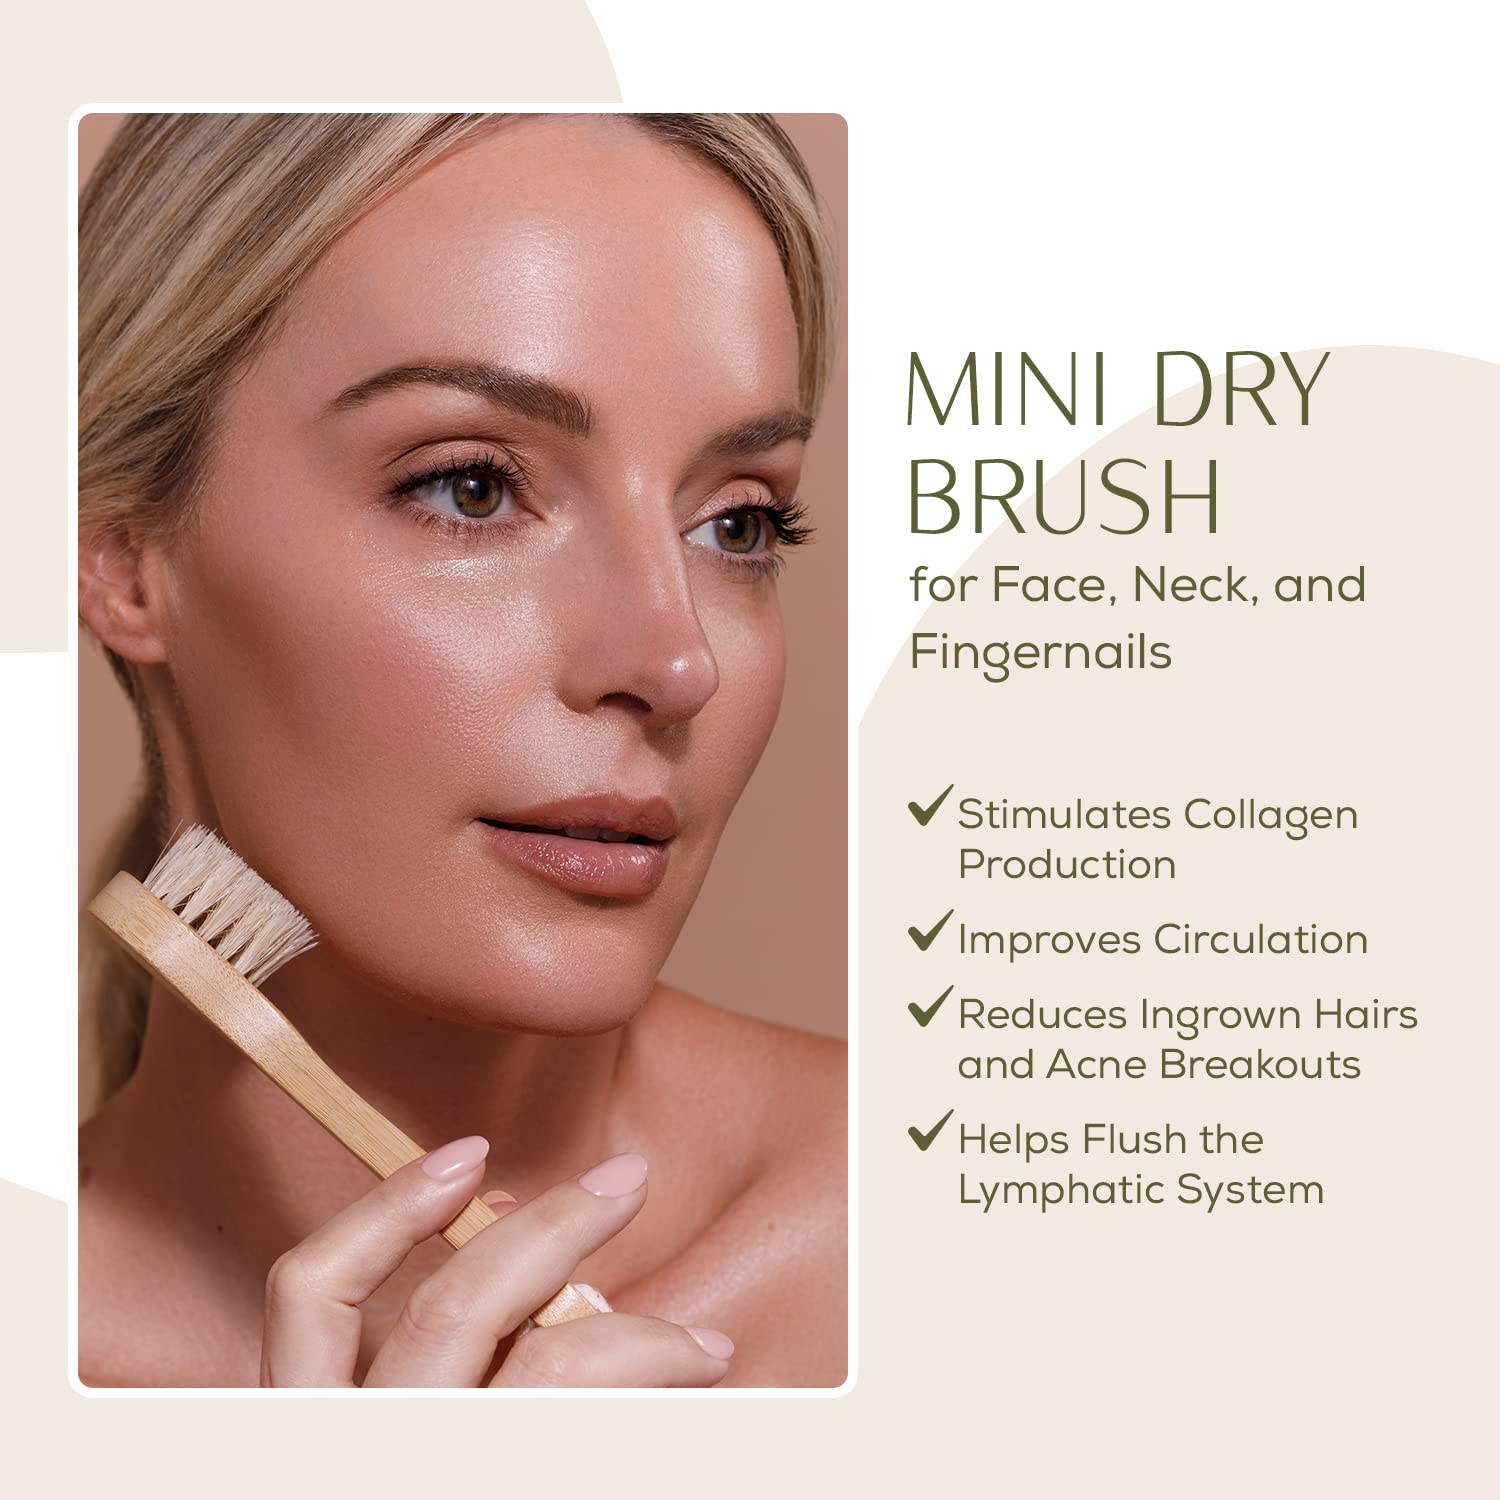 CSM Mini Dry Brush - Natural Bristle Small Body Brush, Exfoliating Facial Cleansing Brush for Soft Skin and Other Sensitive Areas Like Your Neck, Chest, and Nails